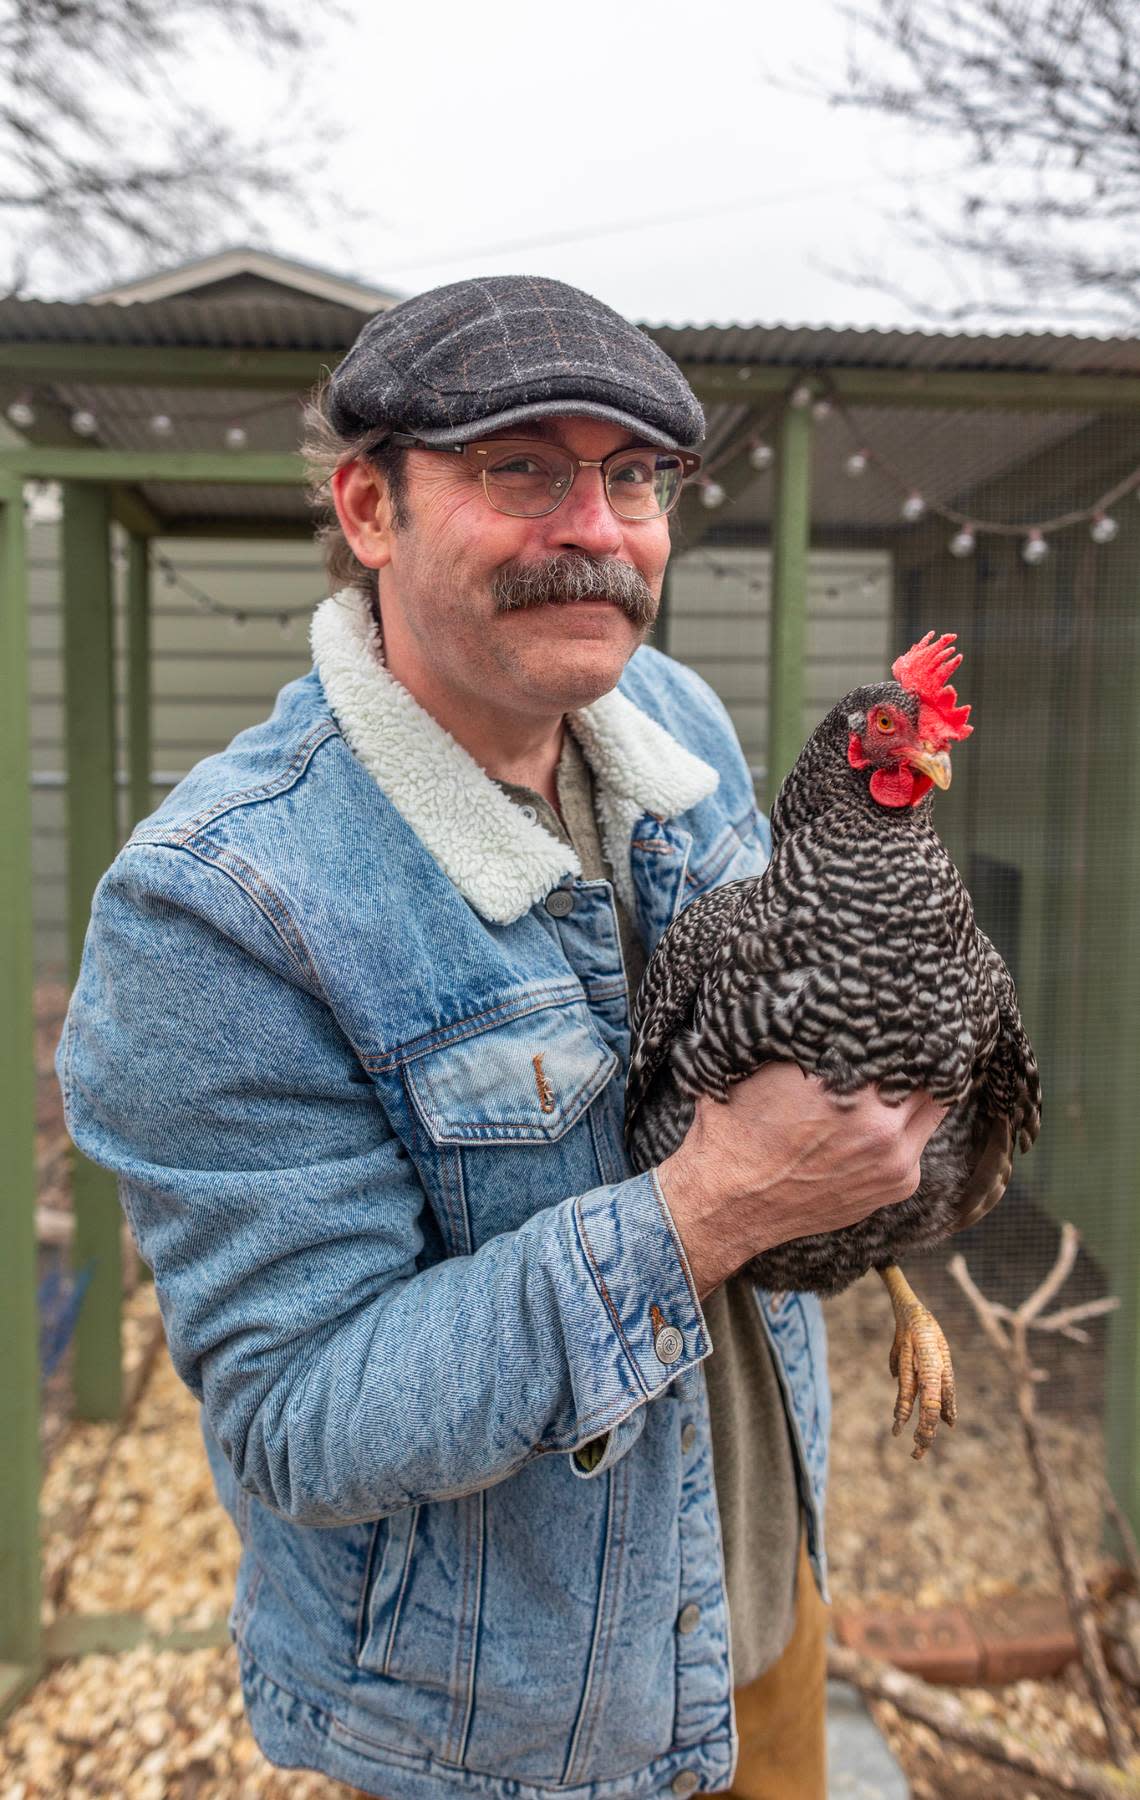 Former KSN reporter and anchor Justin Kraemer now lives in Newton and raises backyard chickens, including a Barred Rock hen named Penny. Kraemer said he doesn’t want to even think about how much he’s spent for each egg his girls have given him.